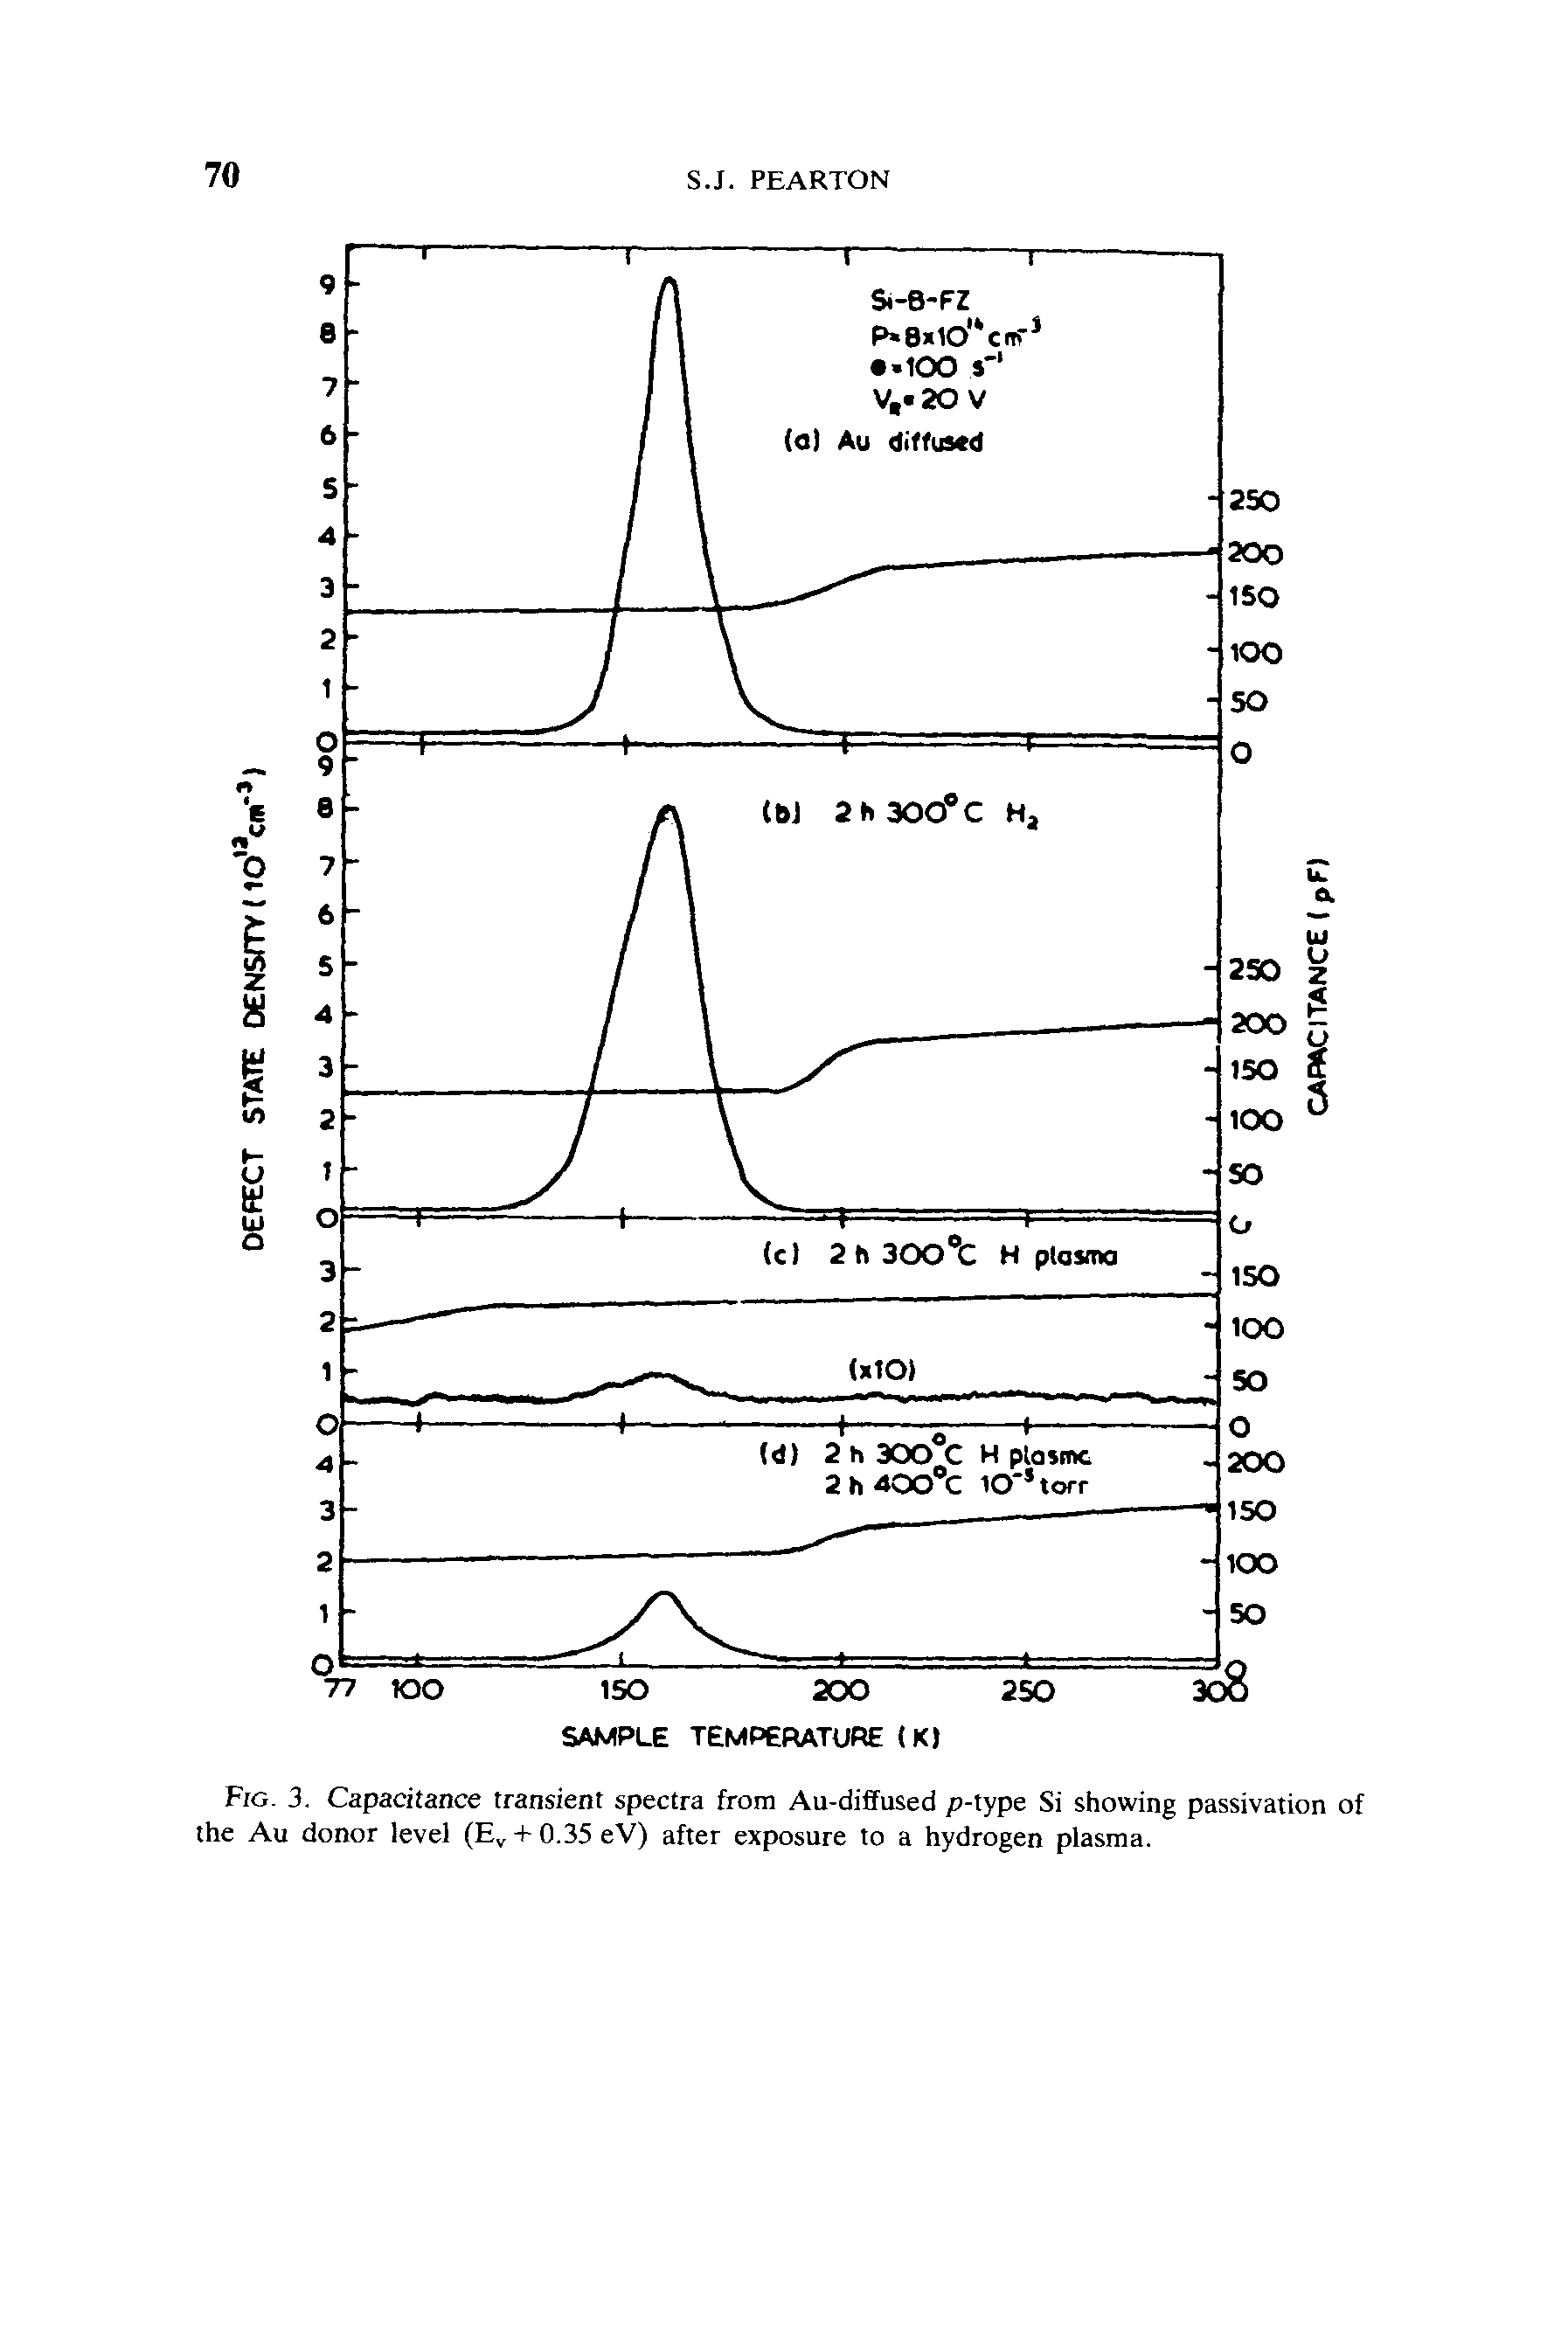 Fig. 3. Capacitance transient spectra from Au-diffused p-type Si showing passivation of the Au donor level (Ev + 0.35eV) after exposure to a hydrogen plasma.